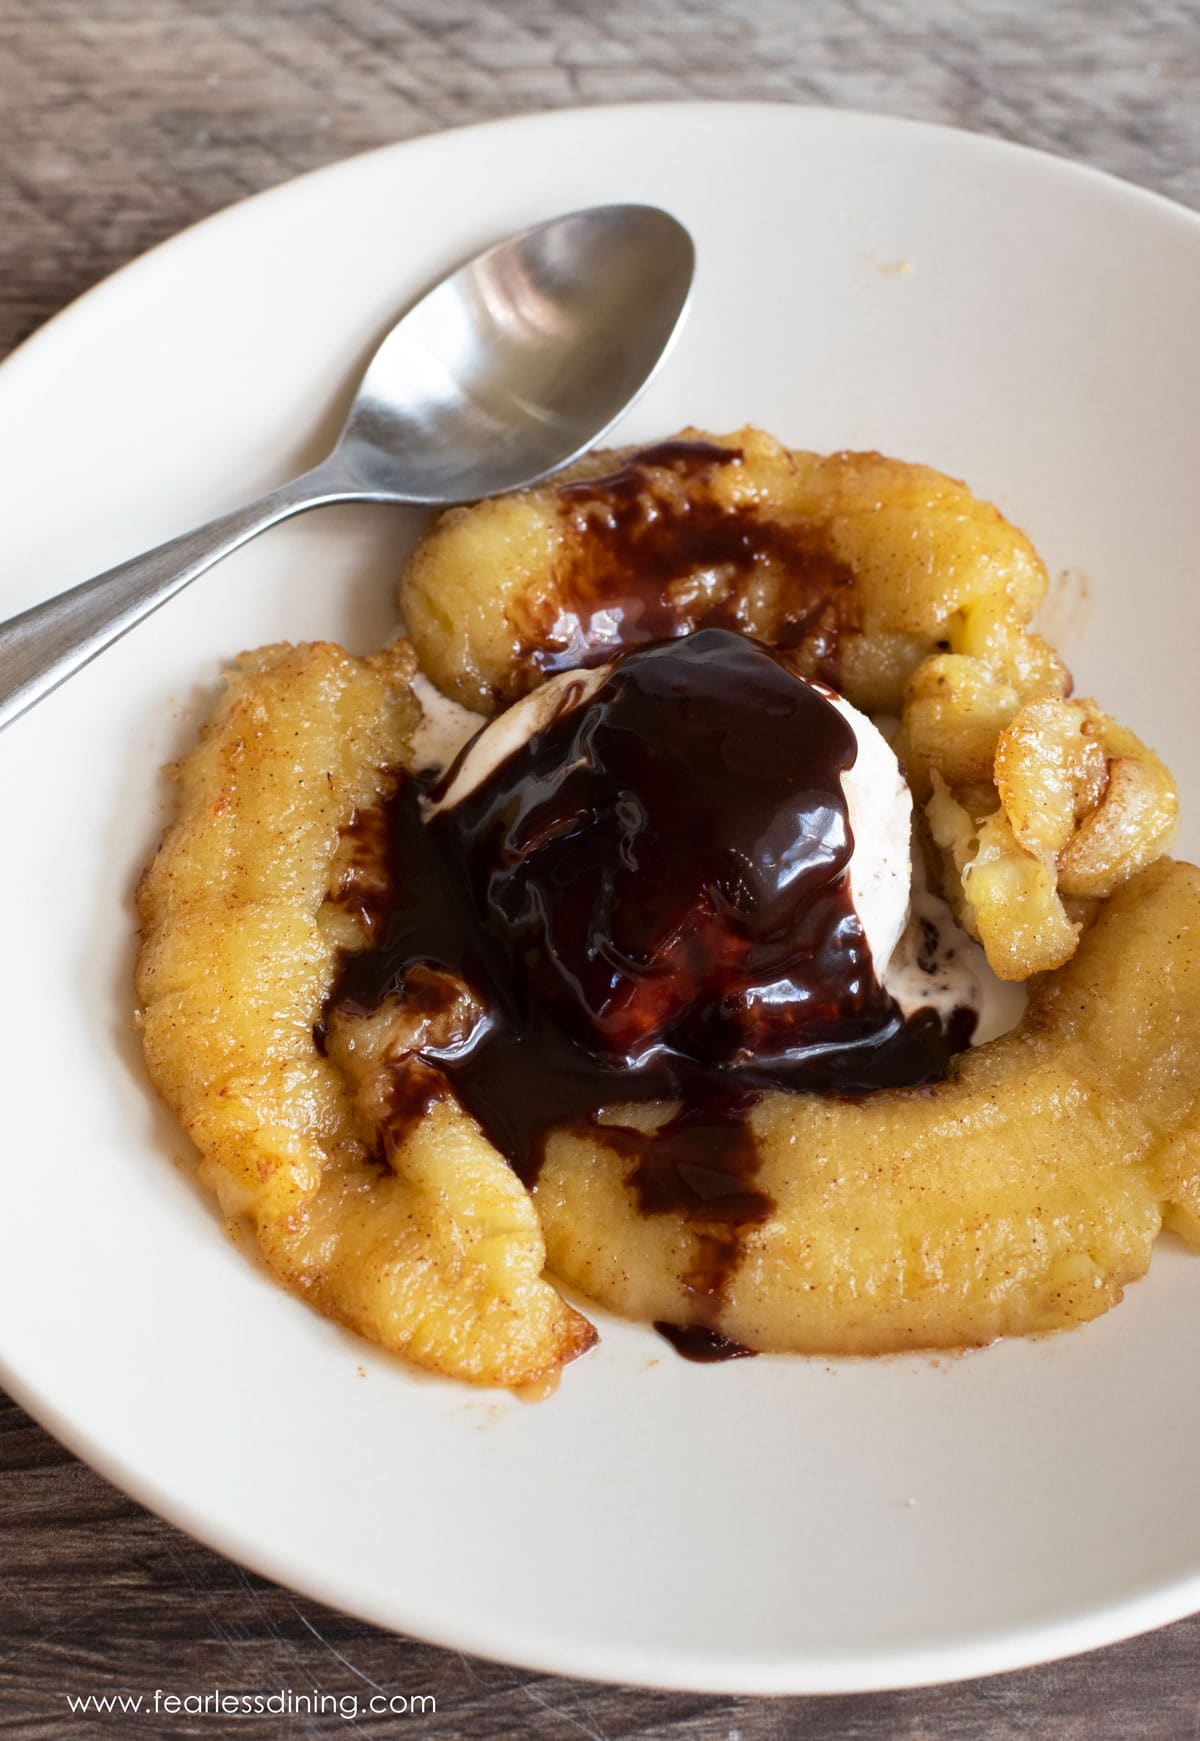 The top view of the caramelized bananas with ice cream and chocolate sauce.